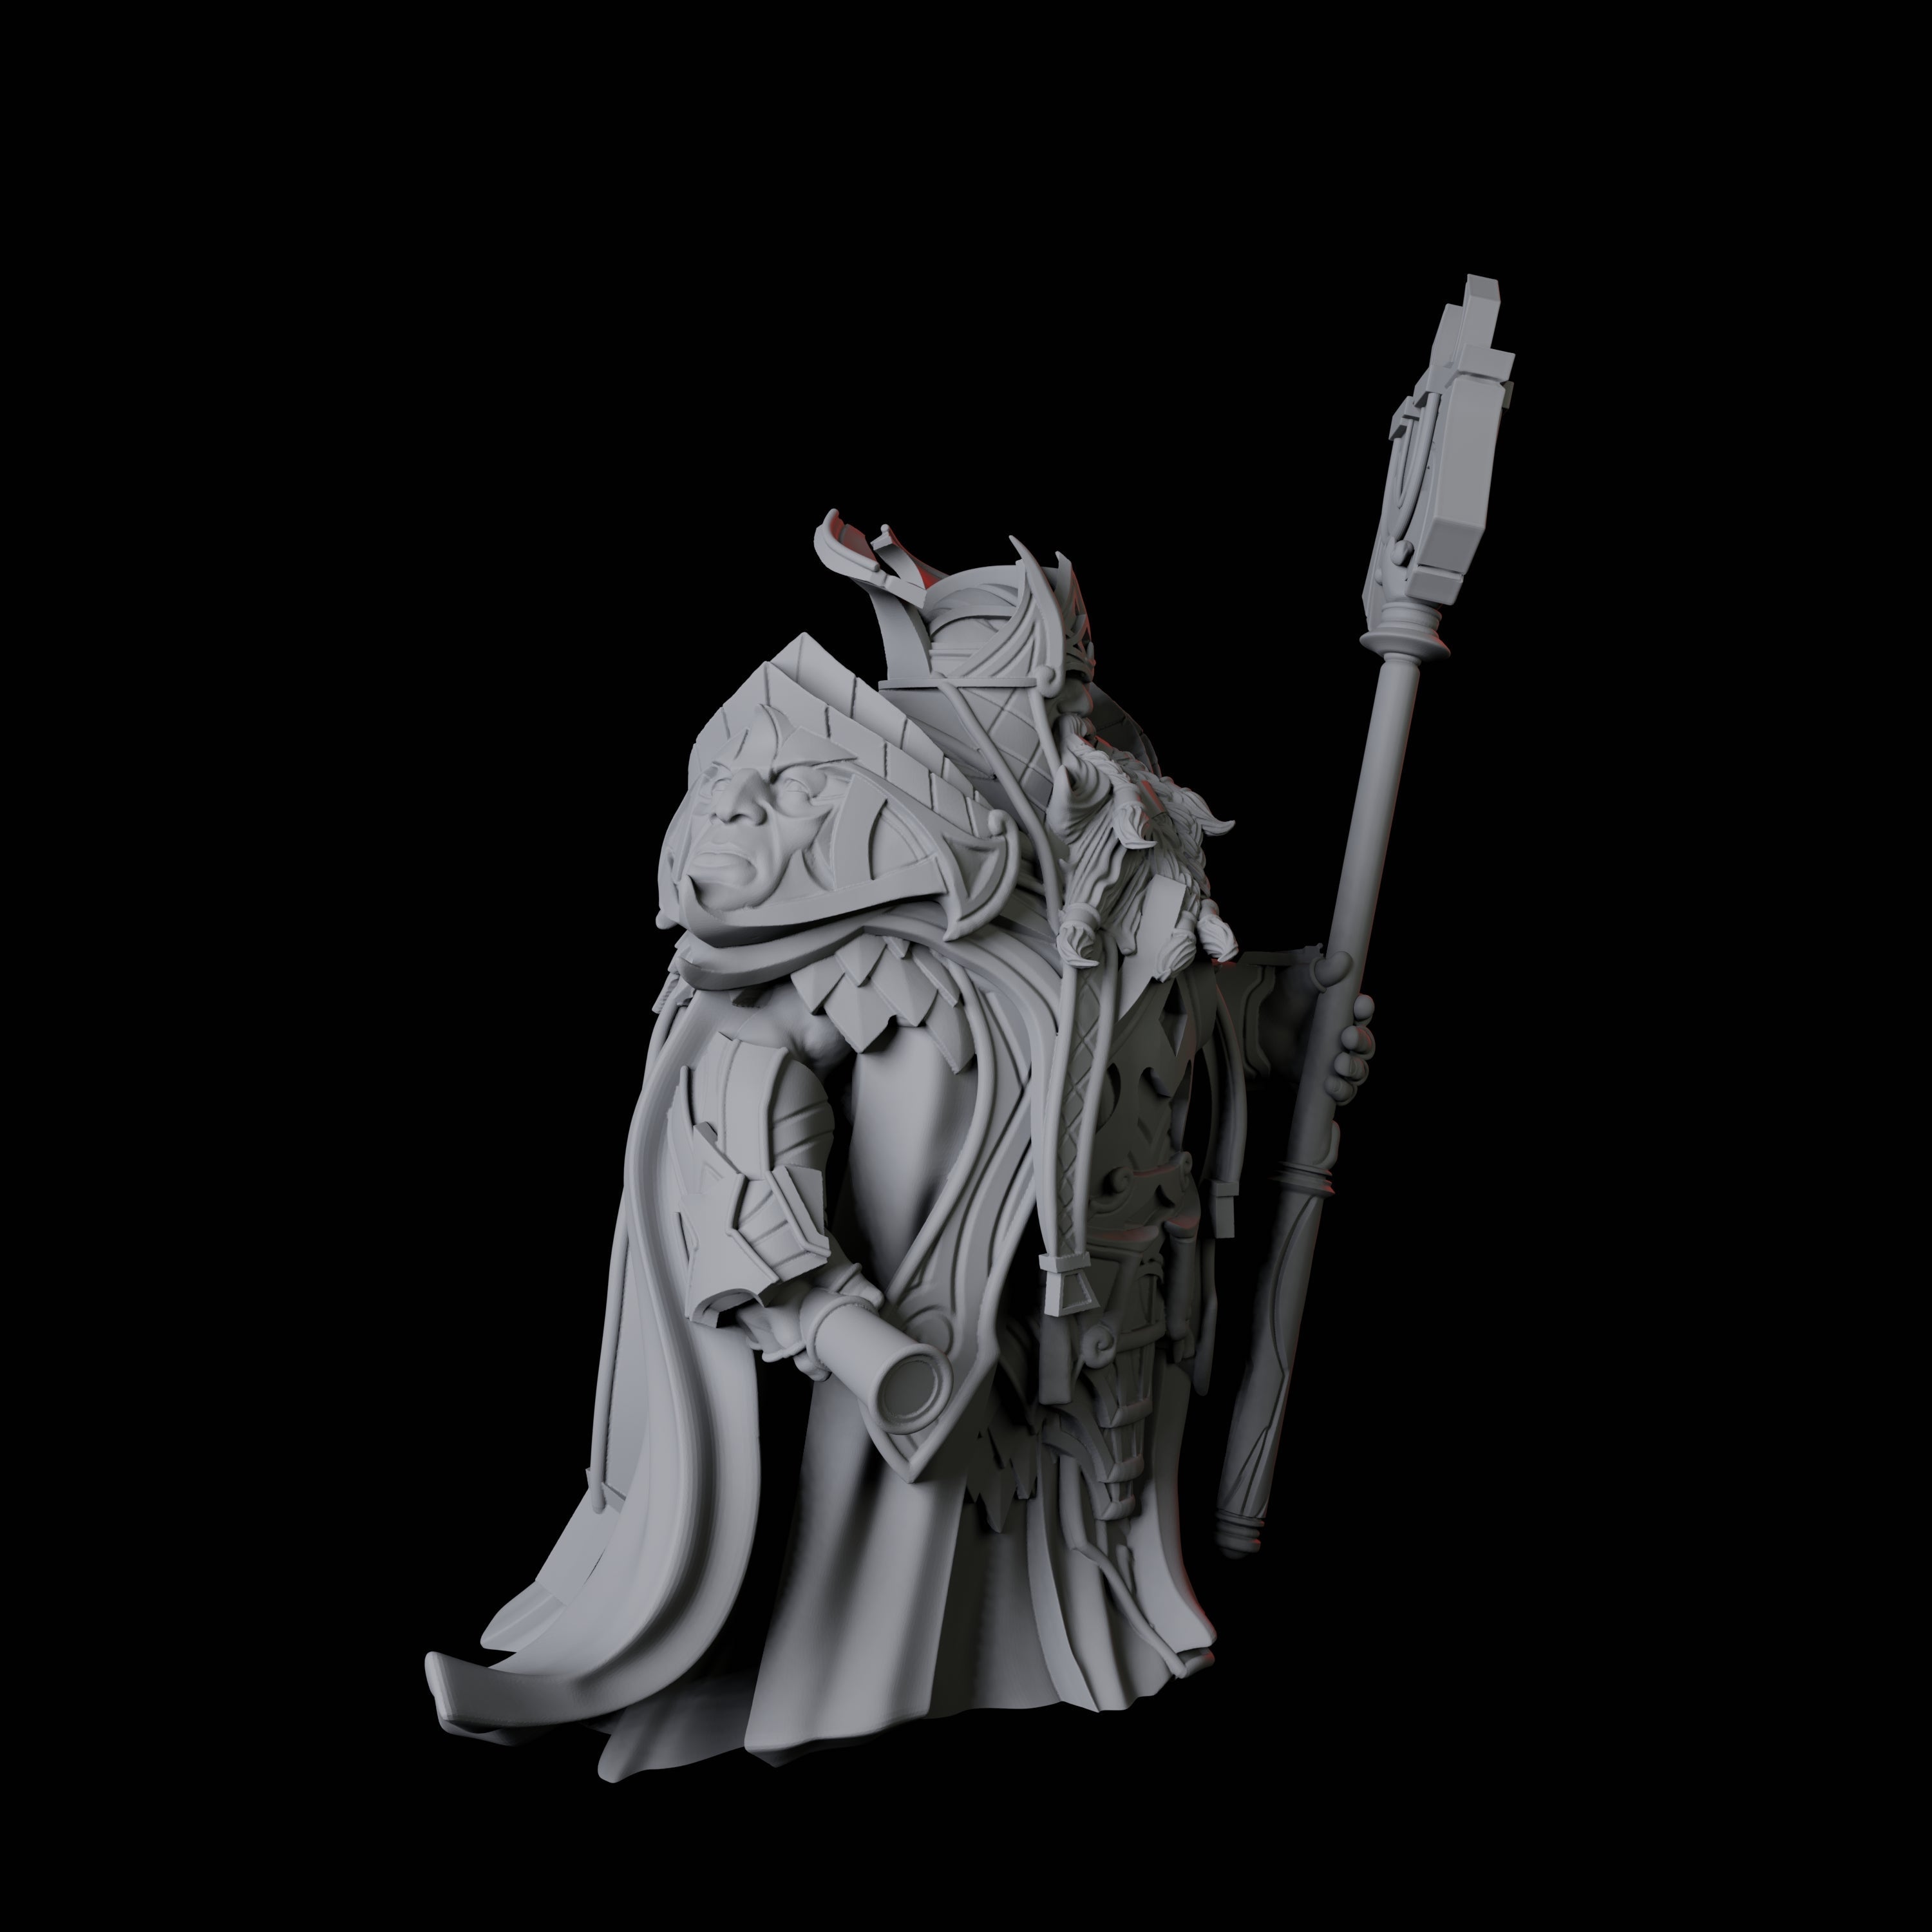 Dwarf High King Miniature for Dungeons and Dragons, Pathfinder or other TTRPGs